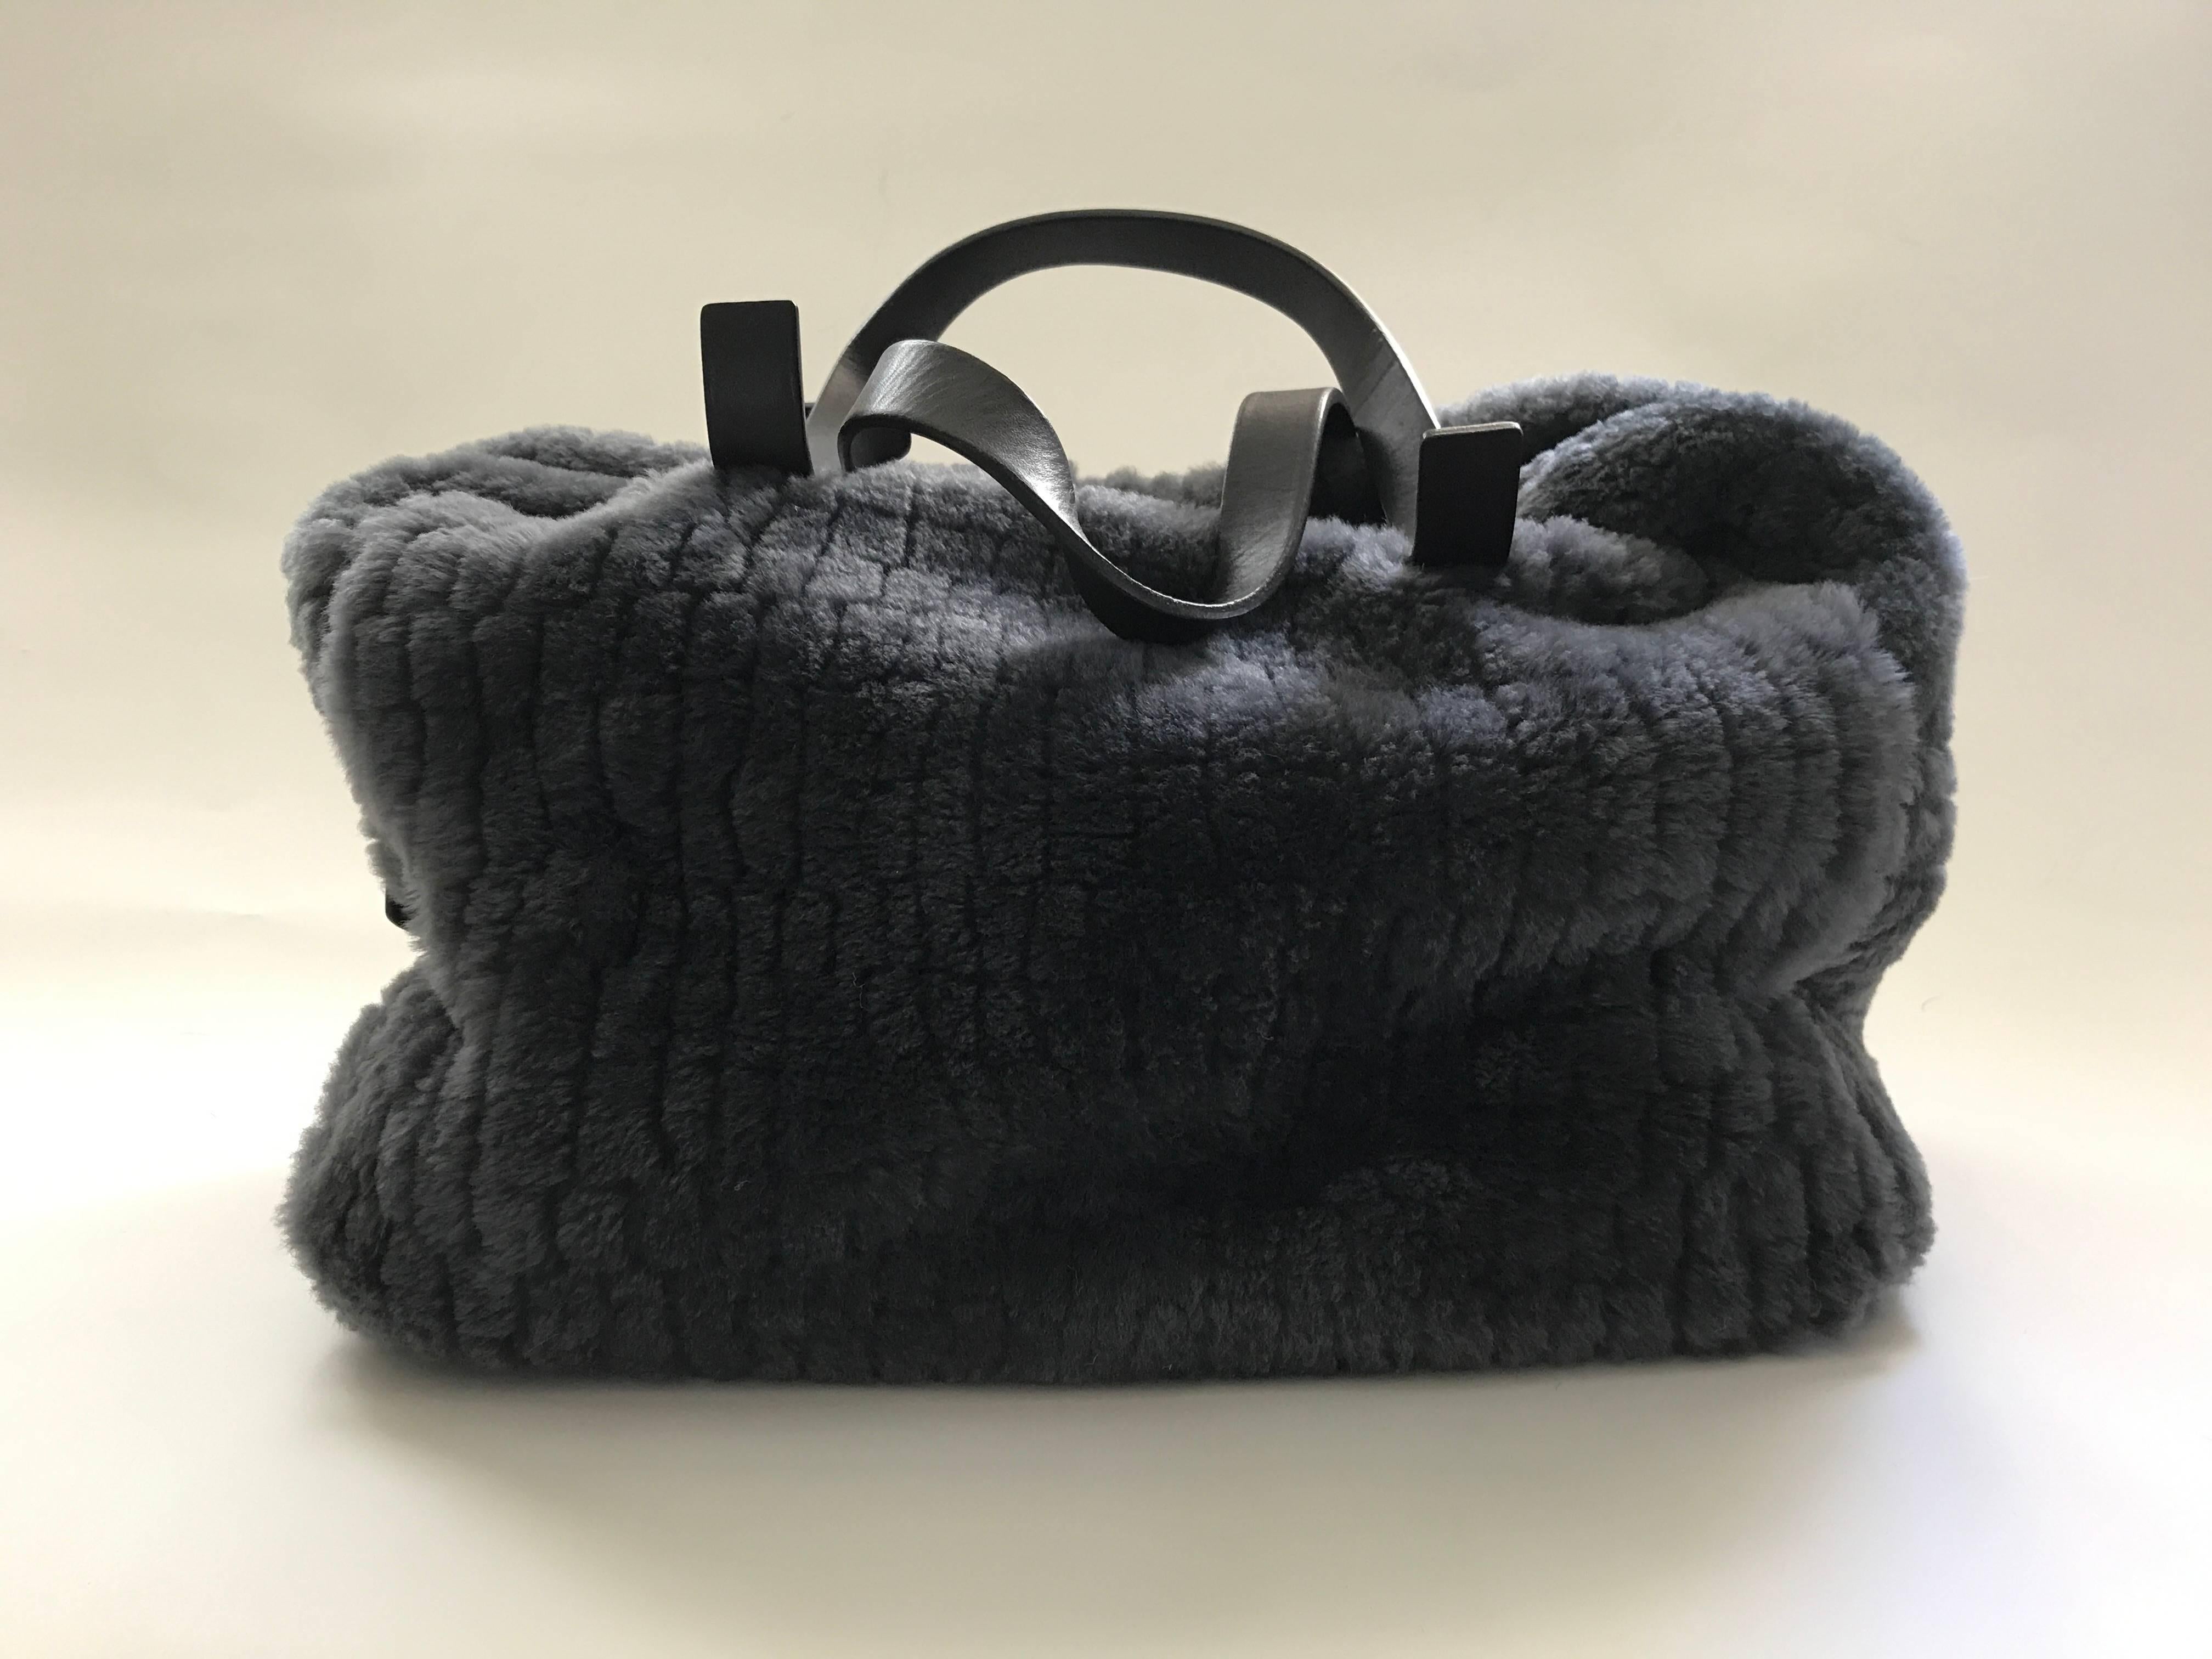 Pewter grey shearling bag in a mock alligator pattern with dark brown 17.5' double flat straps and dark brown leather trim and footed bottom. It closes with a 23' long silver colored zipper. Dark grey fabric lining with three wall pockets including